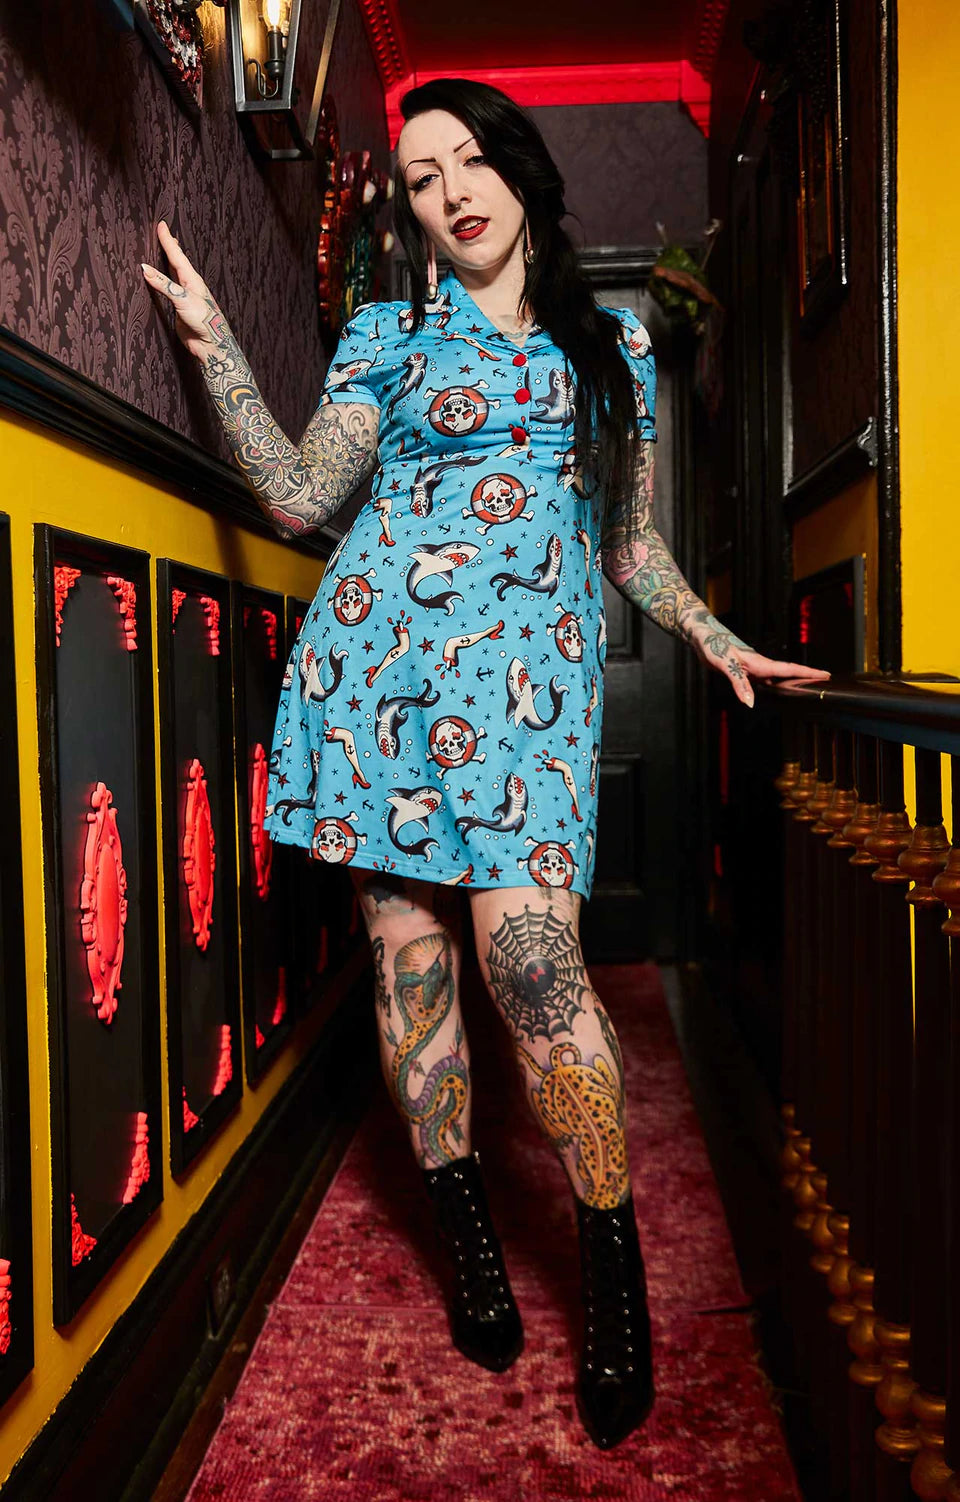 A new Sourpuss dress for every day of the week!